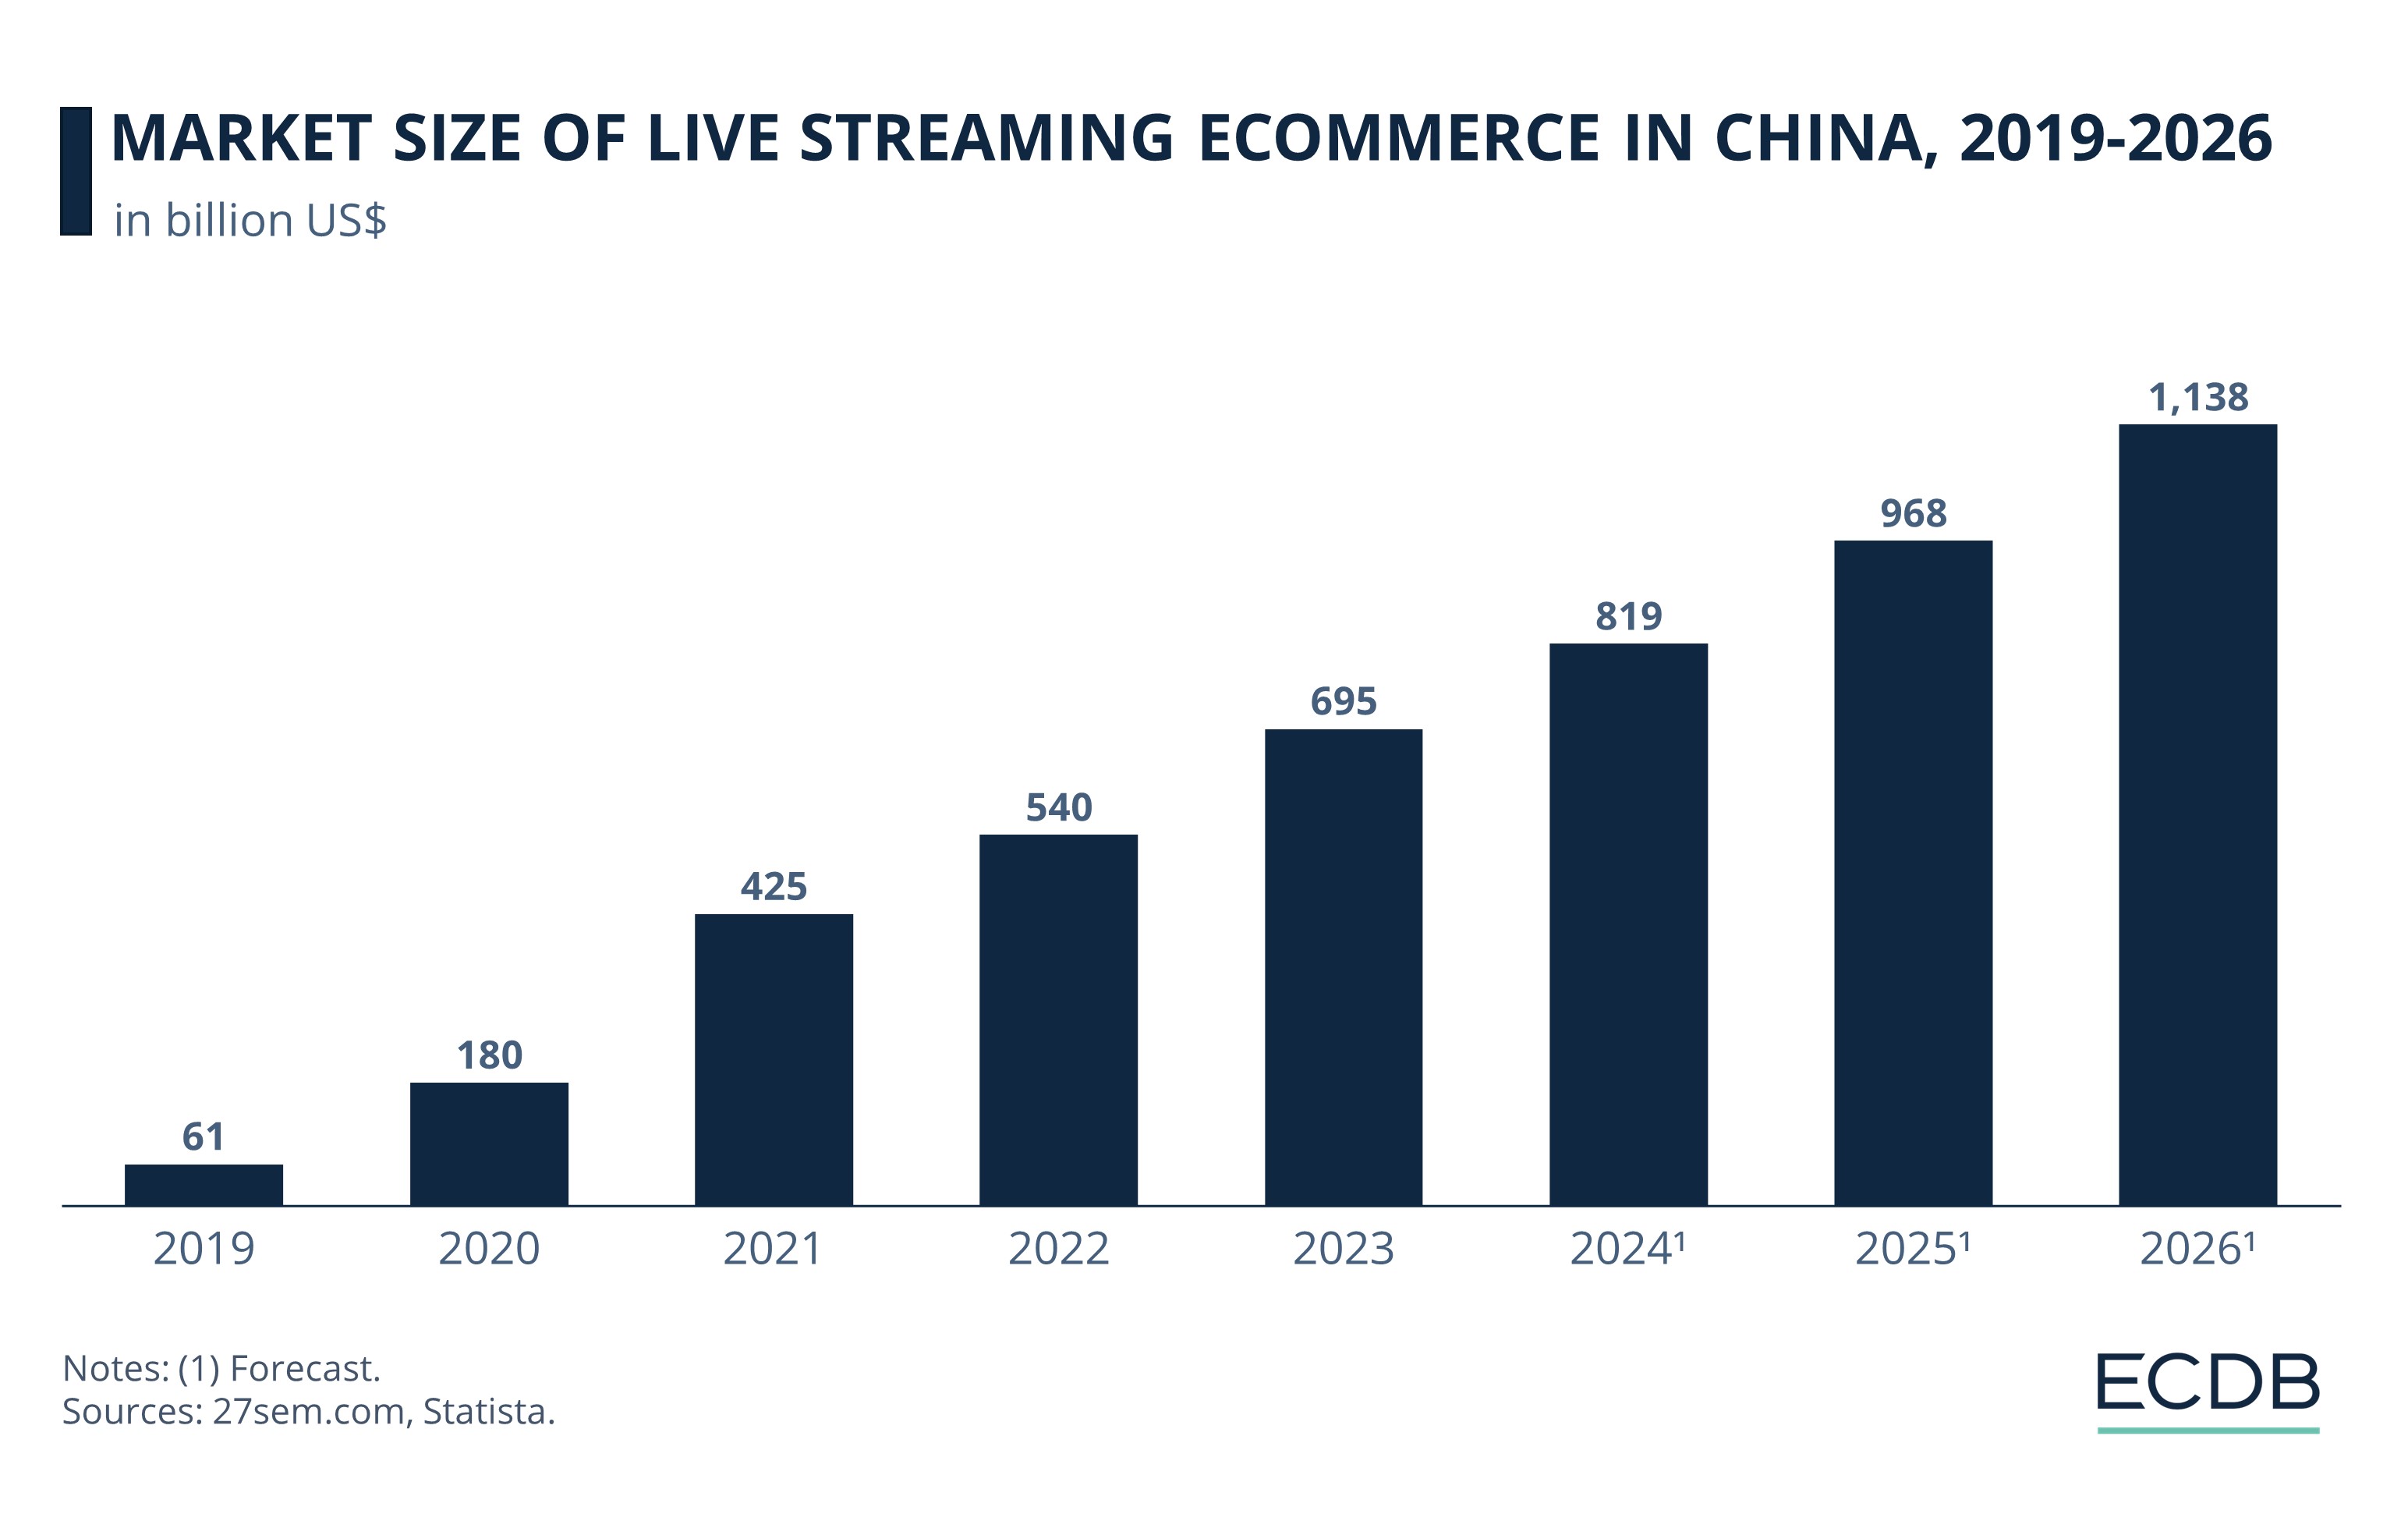 Market Size of Live Streaming Ecommerce in China, 2019-2026